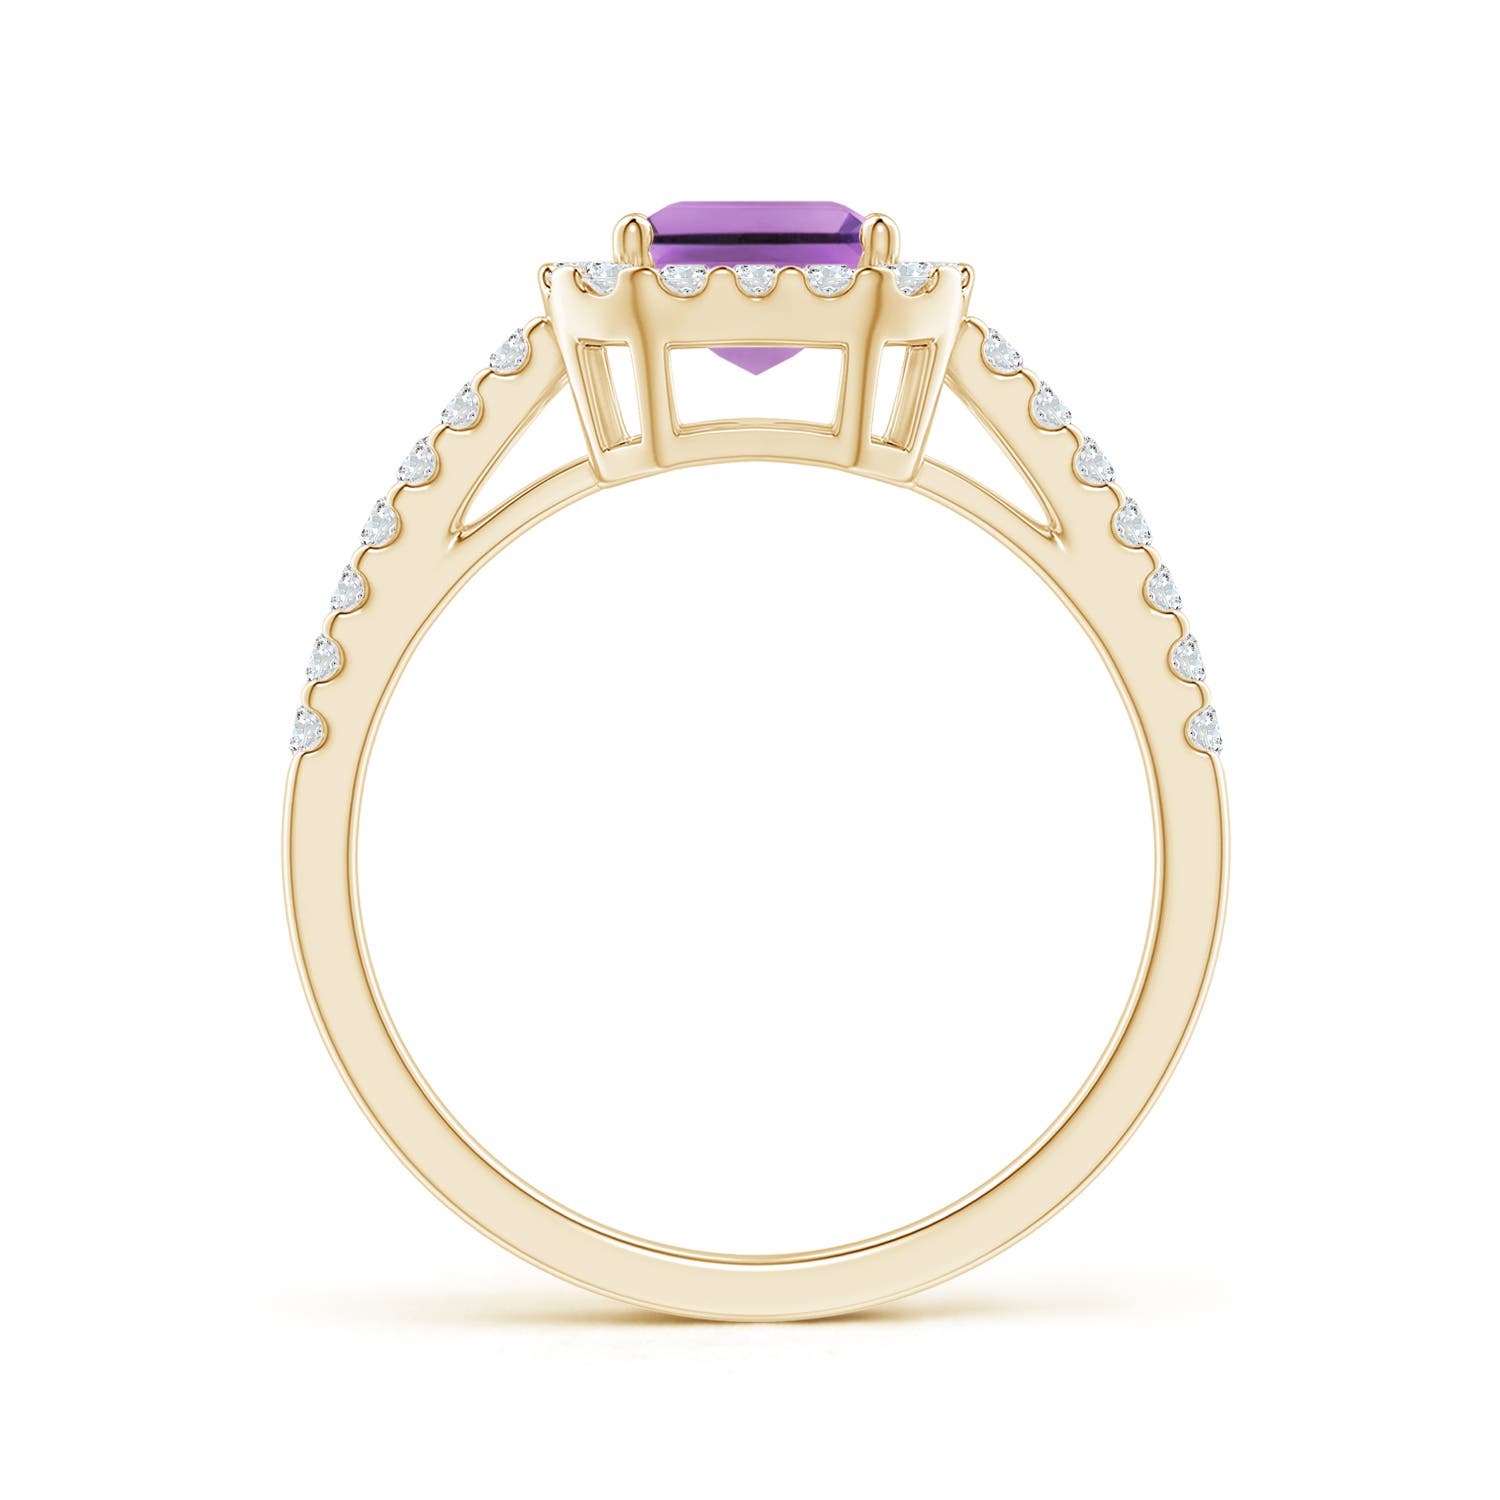 A - Amethyst / 1.91 CT / 14 KT Yellow Gold